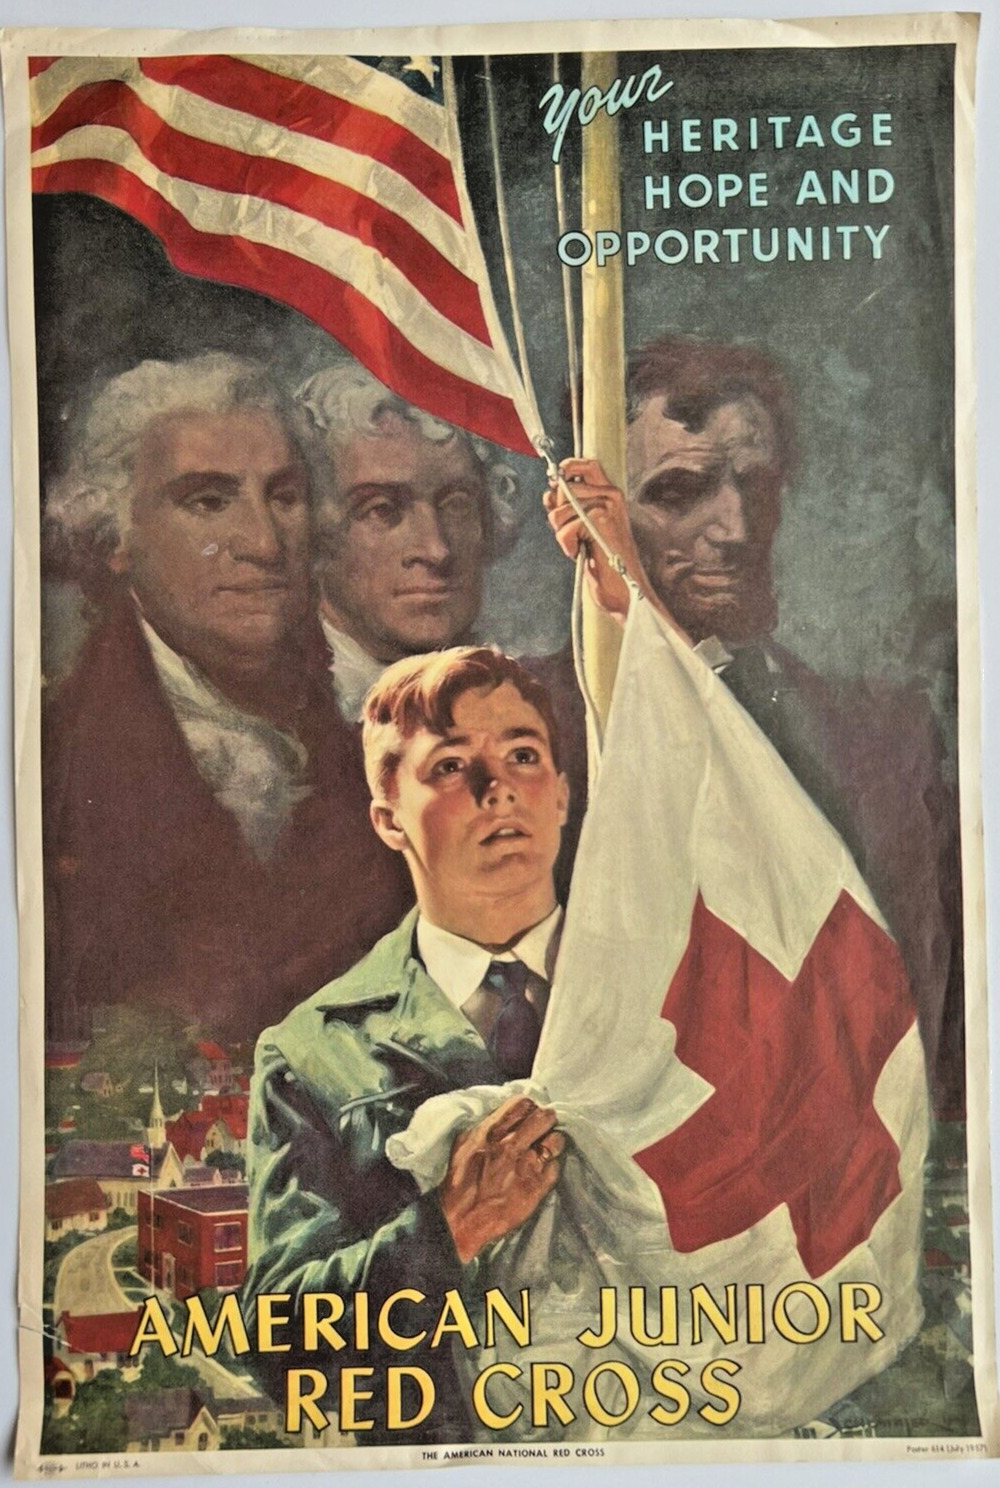 July 1957 AMERICAN JUNIOR RED CROSS Poster Your Heritage Hope & Opportunity 3E